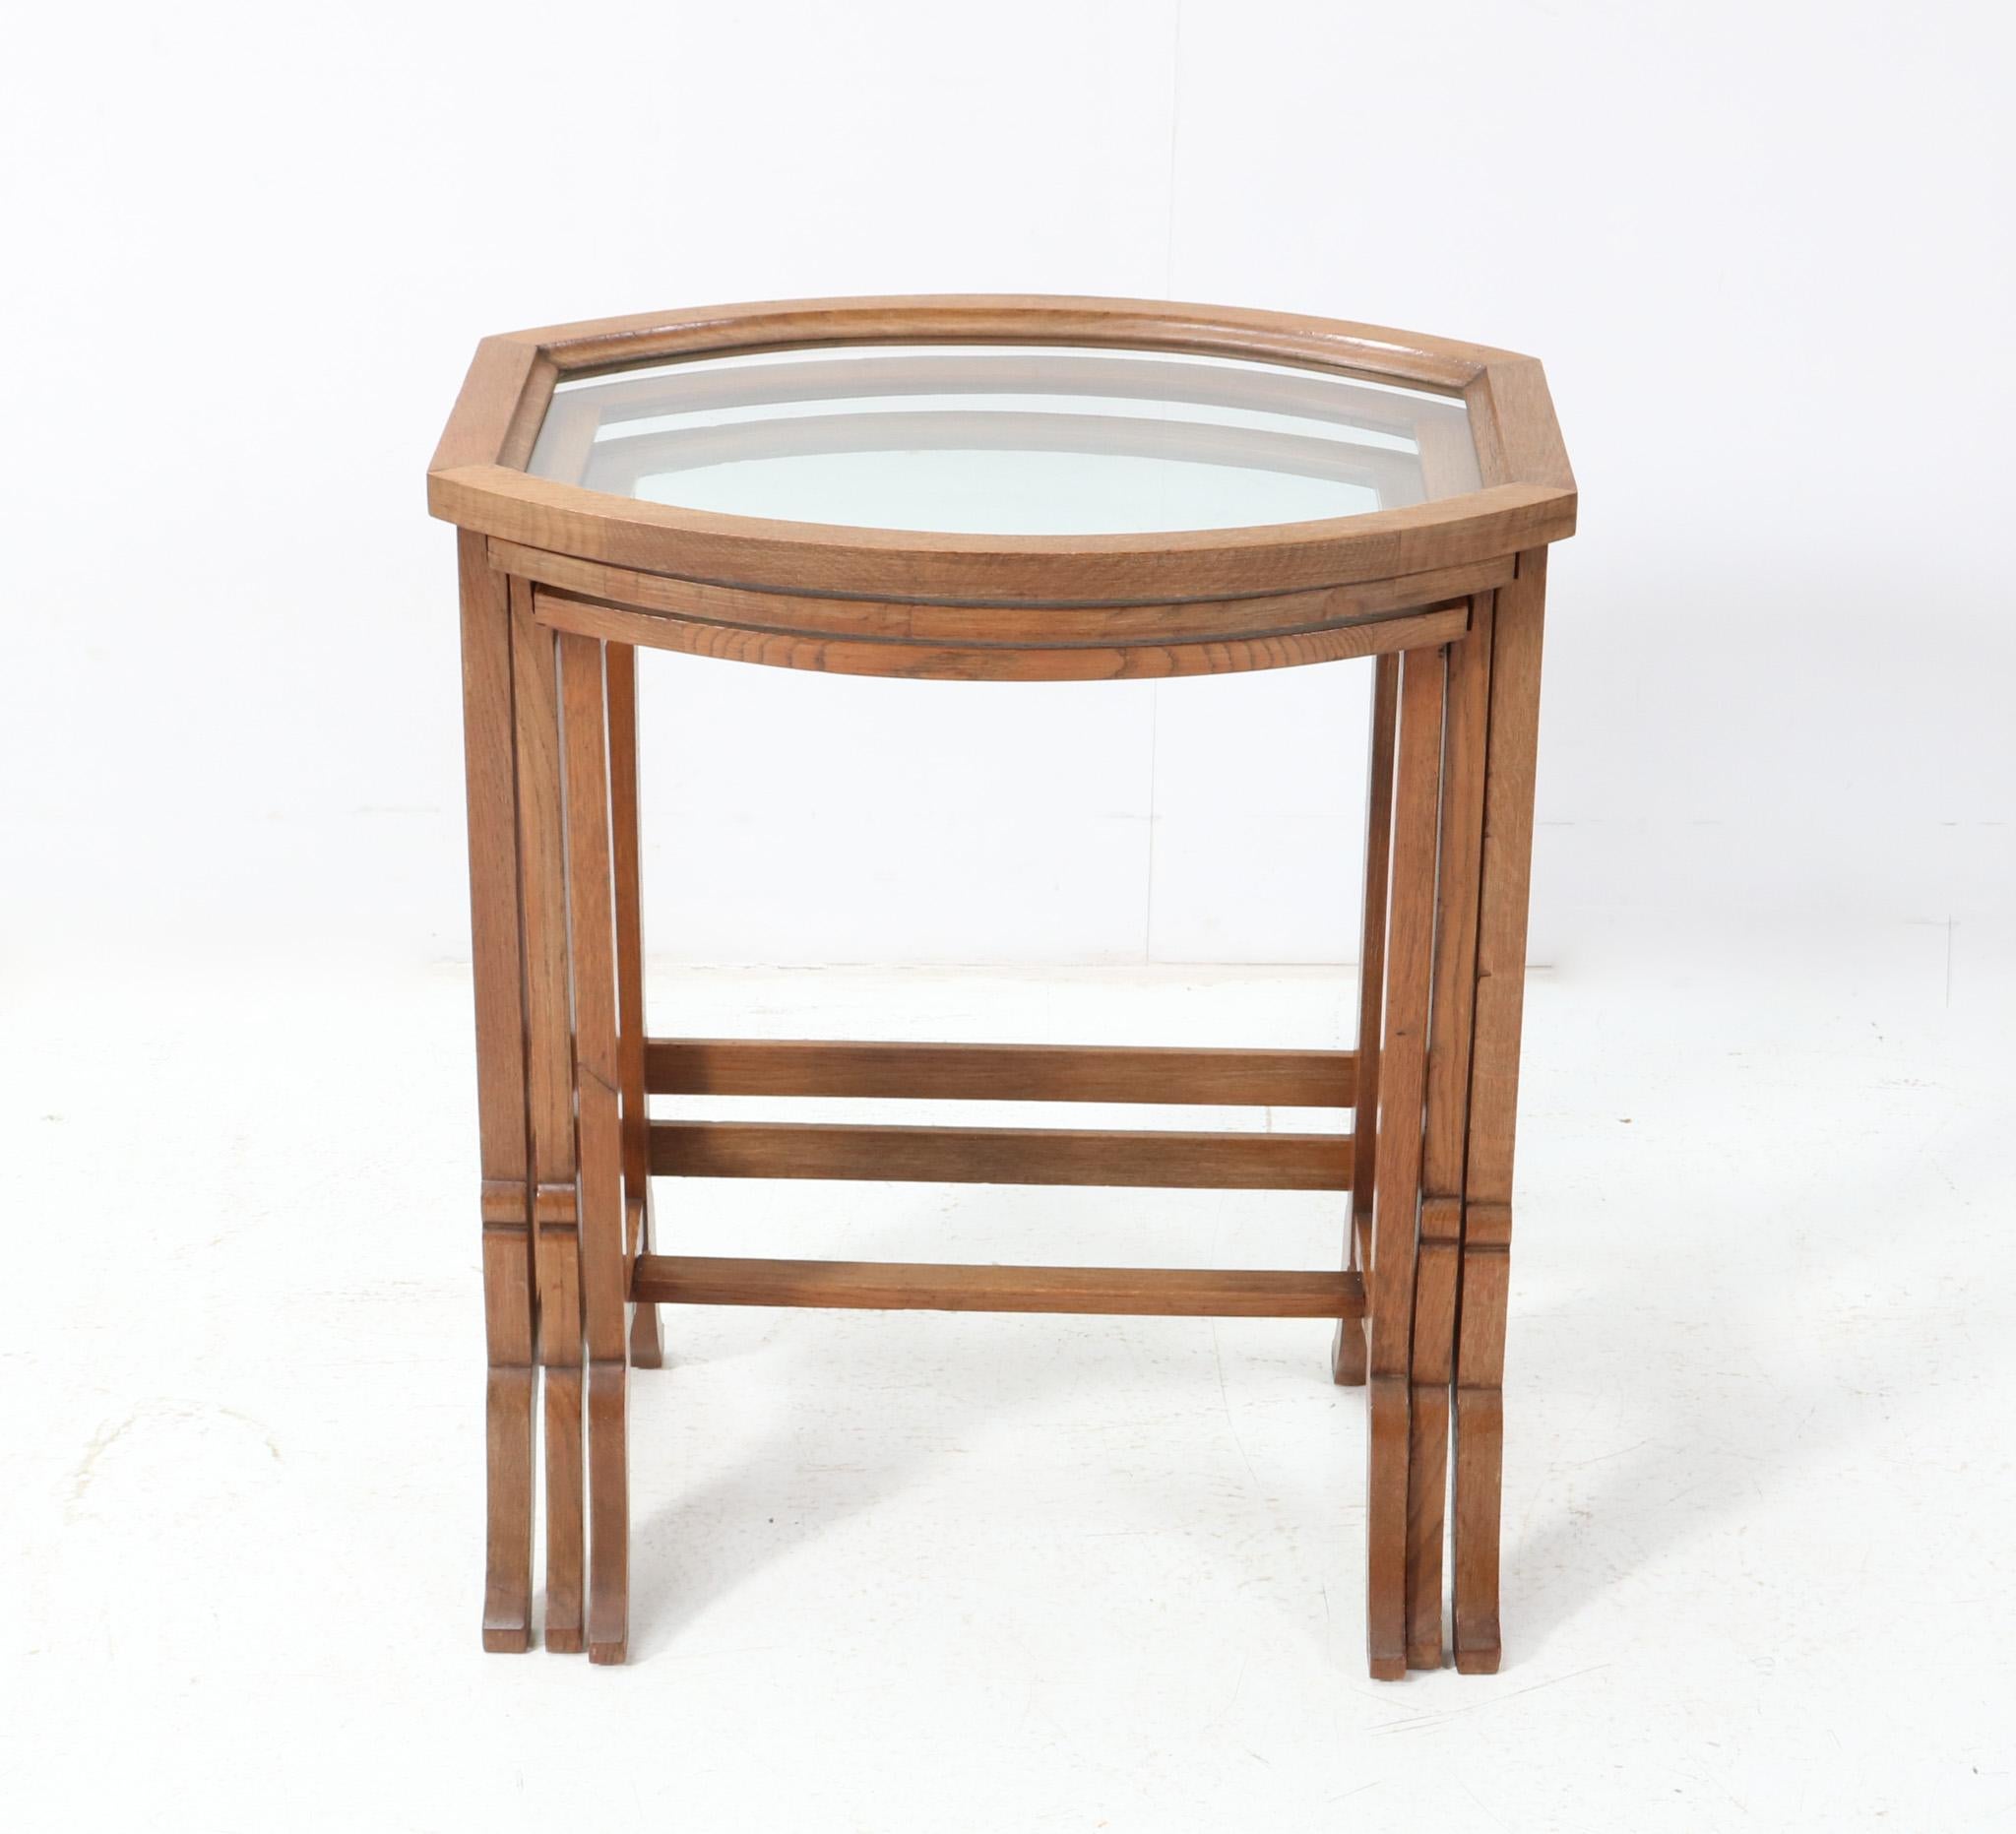 Stunning and rare set of three Art Nouveau nesting tables.
Solid oak and elegant shaped frames with glass tops.
This wonderful set of three Art Nouveau nesting tables is in very good original condition with minor wear consistent with age and use,